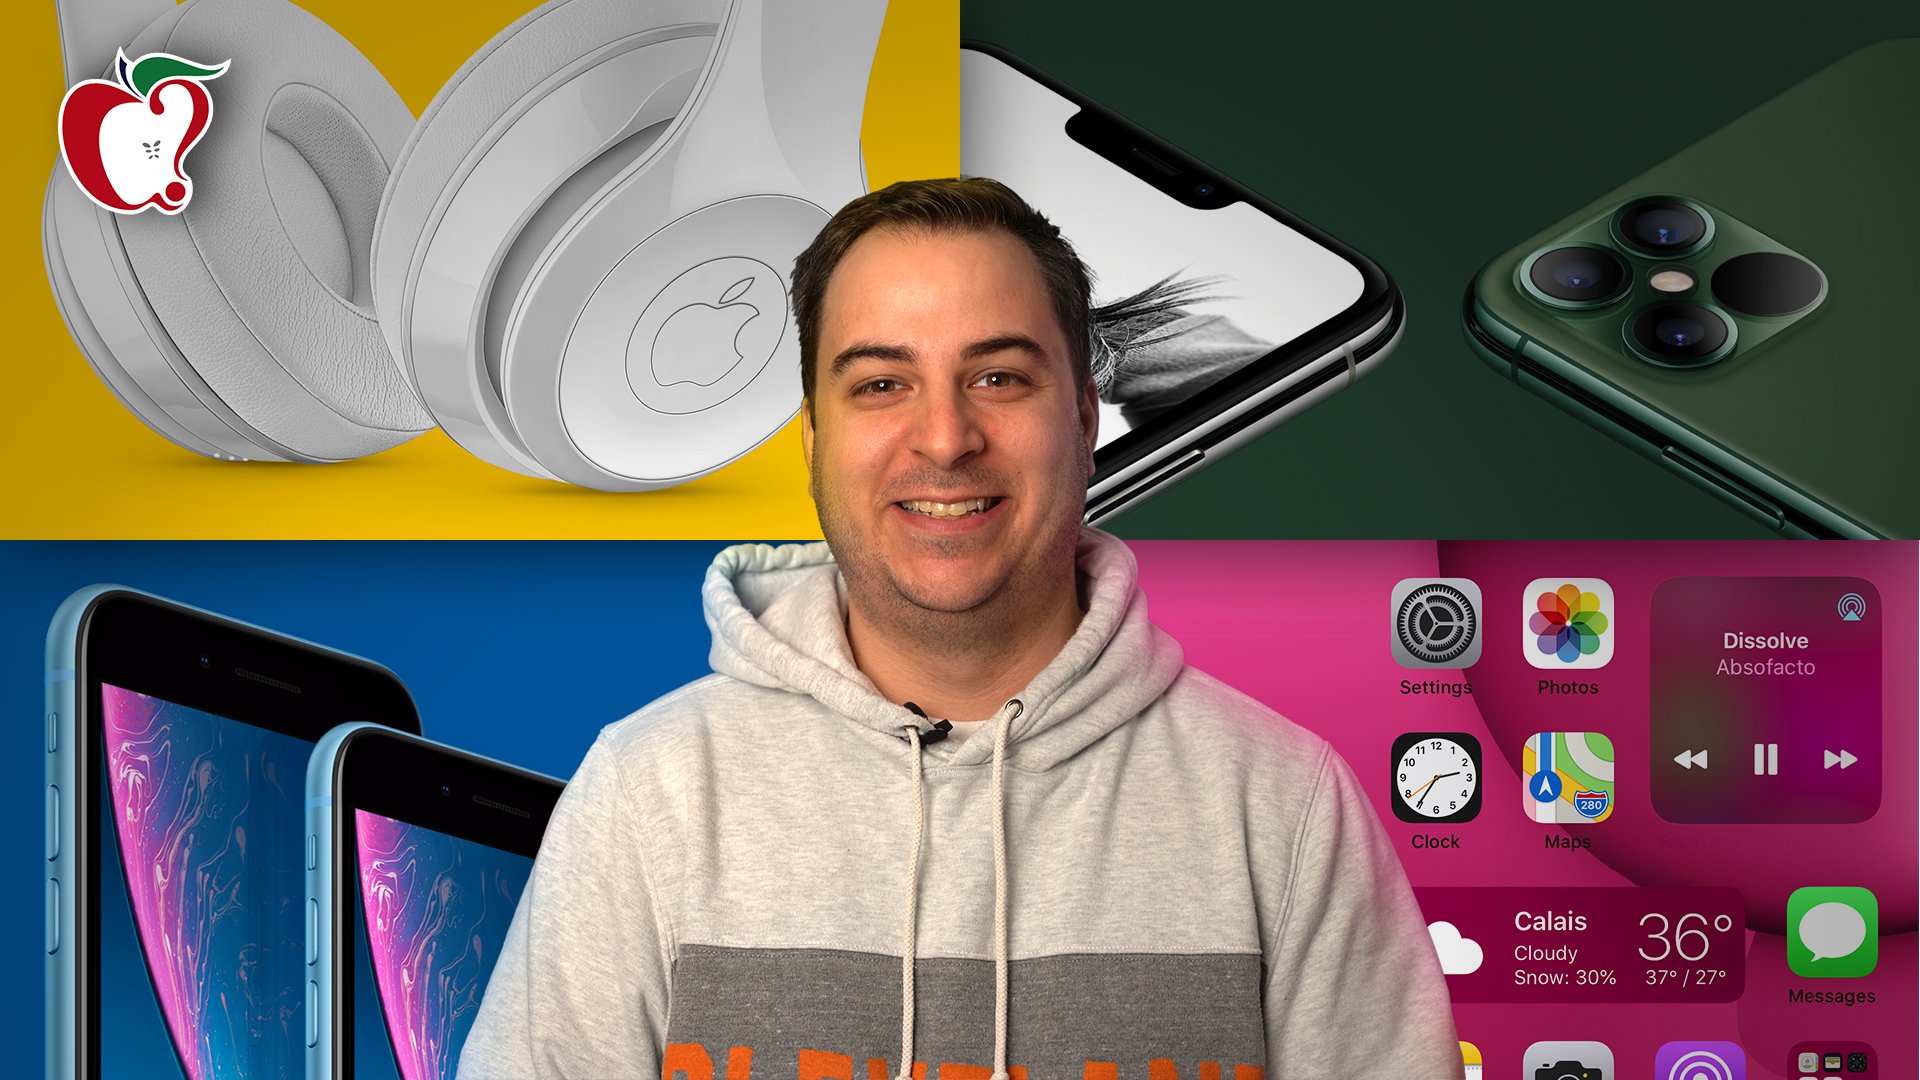 Top Stories: iOS 14 Leaks, iPhone and 13" MacBook Pro Rumors, and More